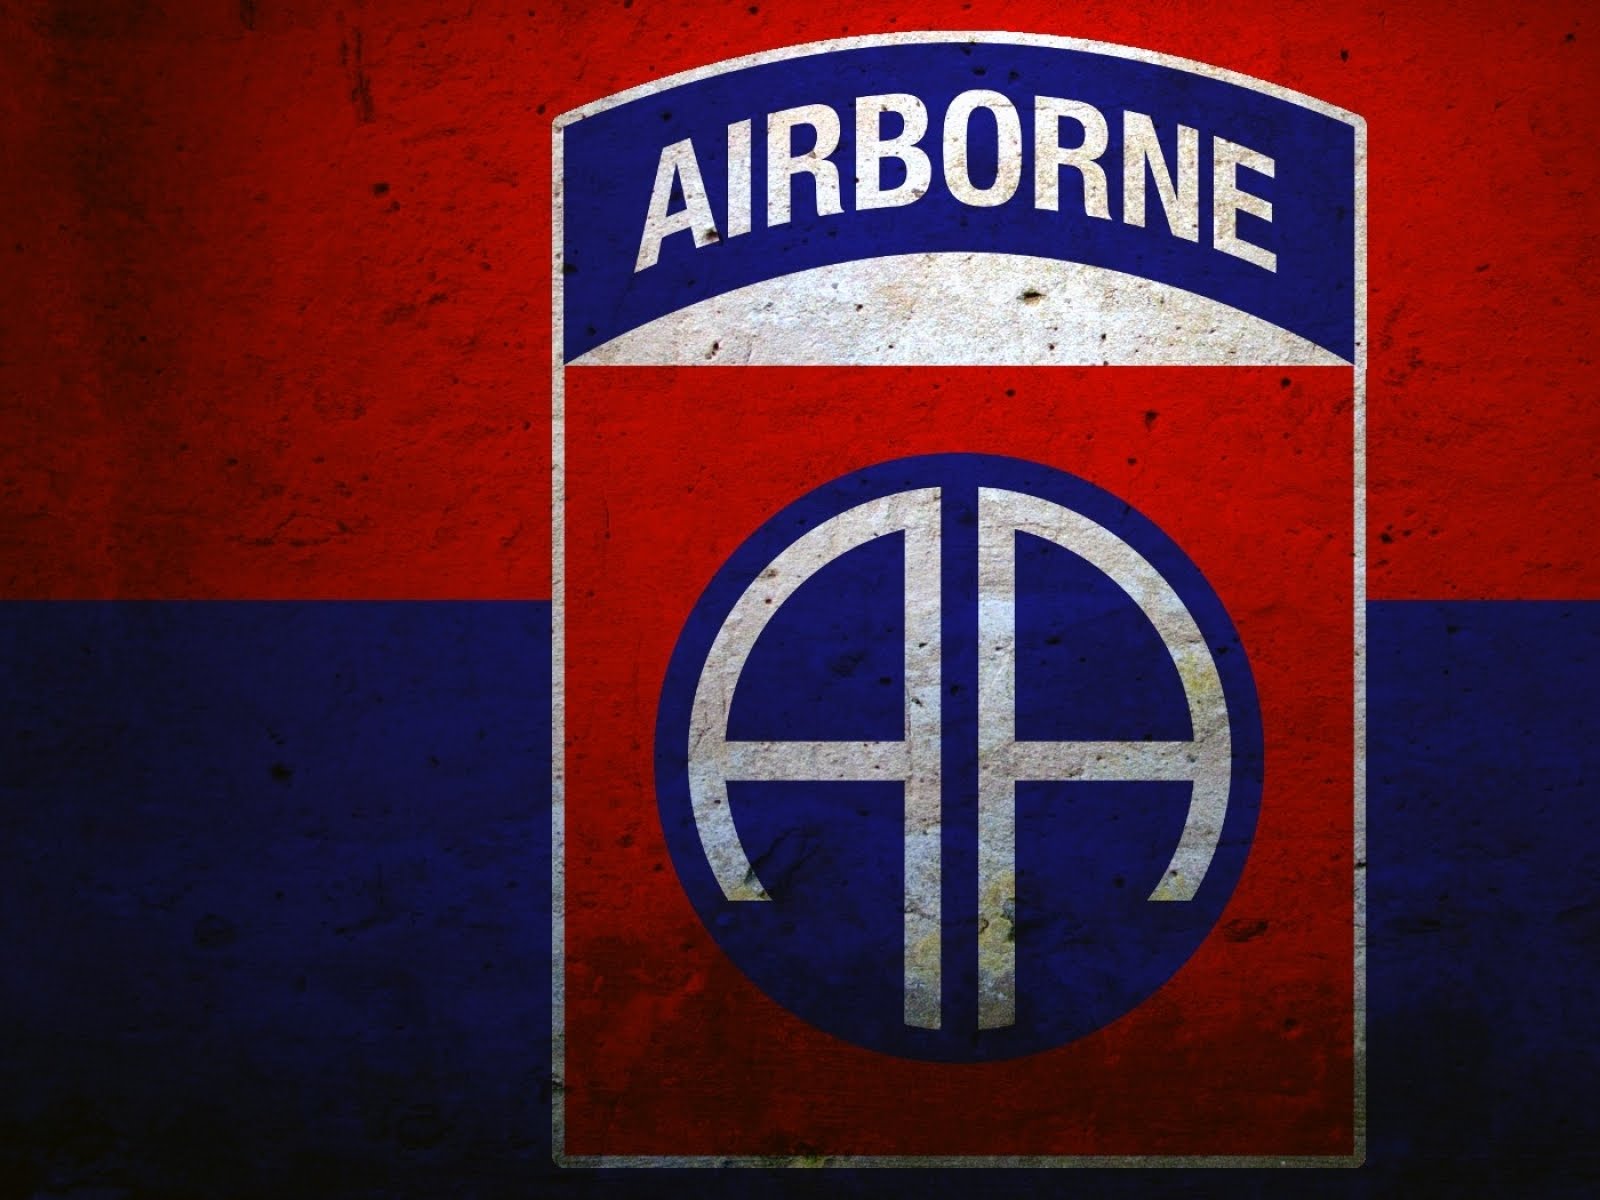 82nd Airborne Wallpaper Group